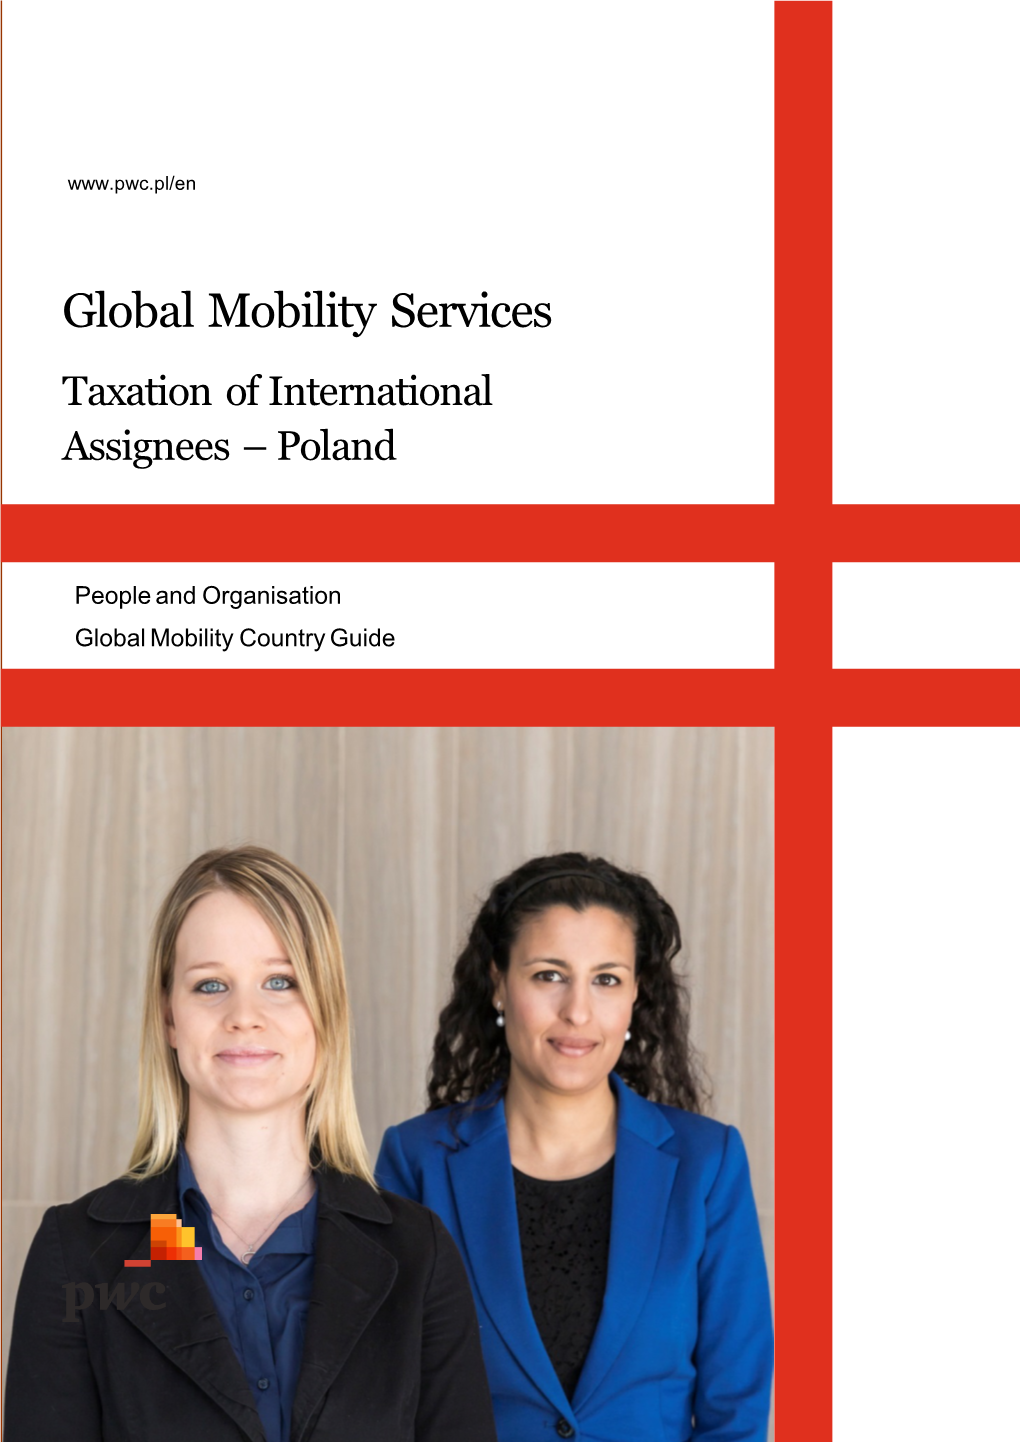 Global Mobility Services Taxation of International Assignees – Poland